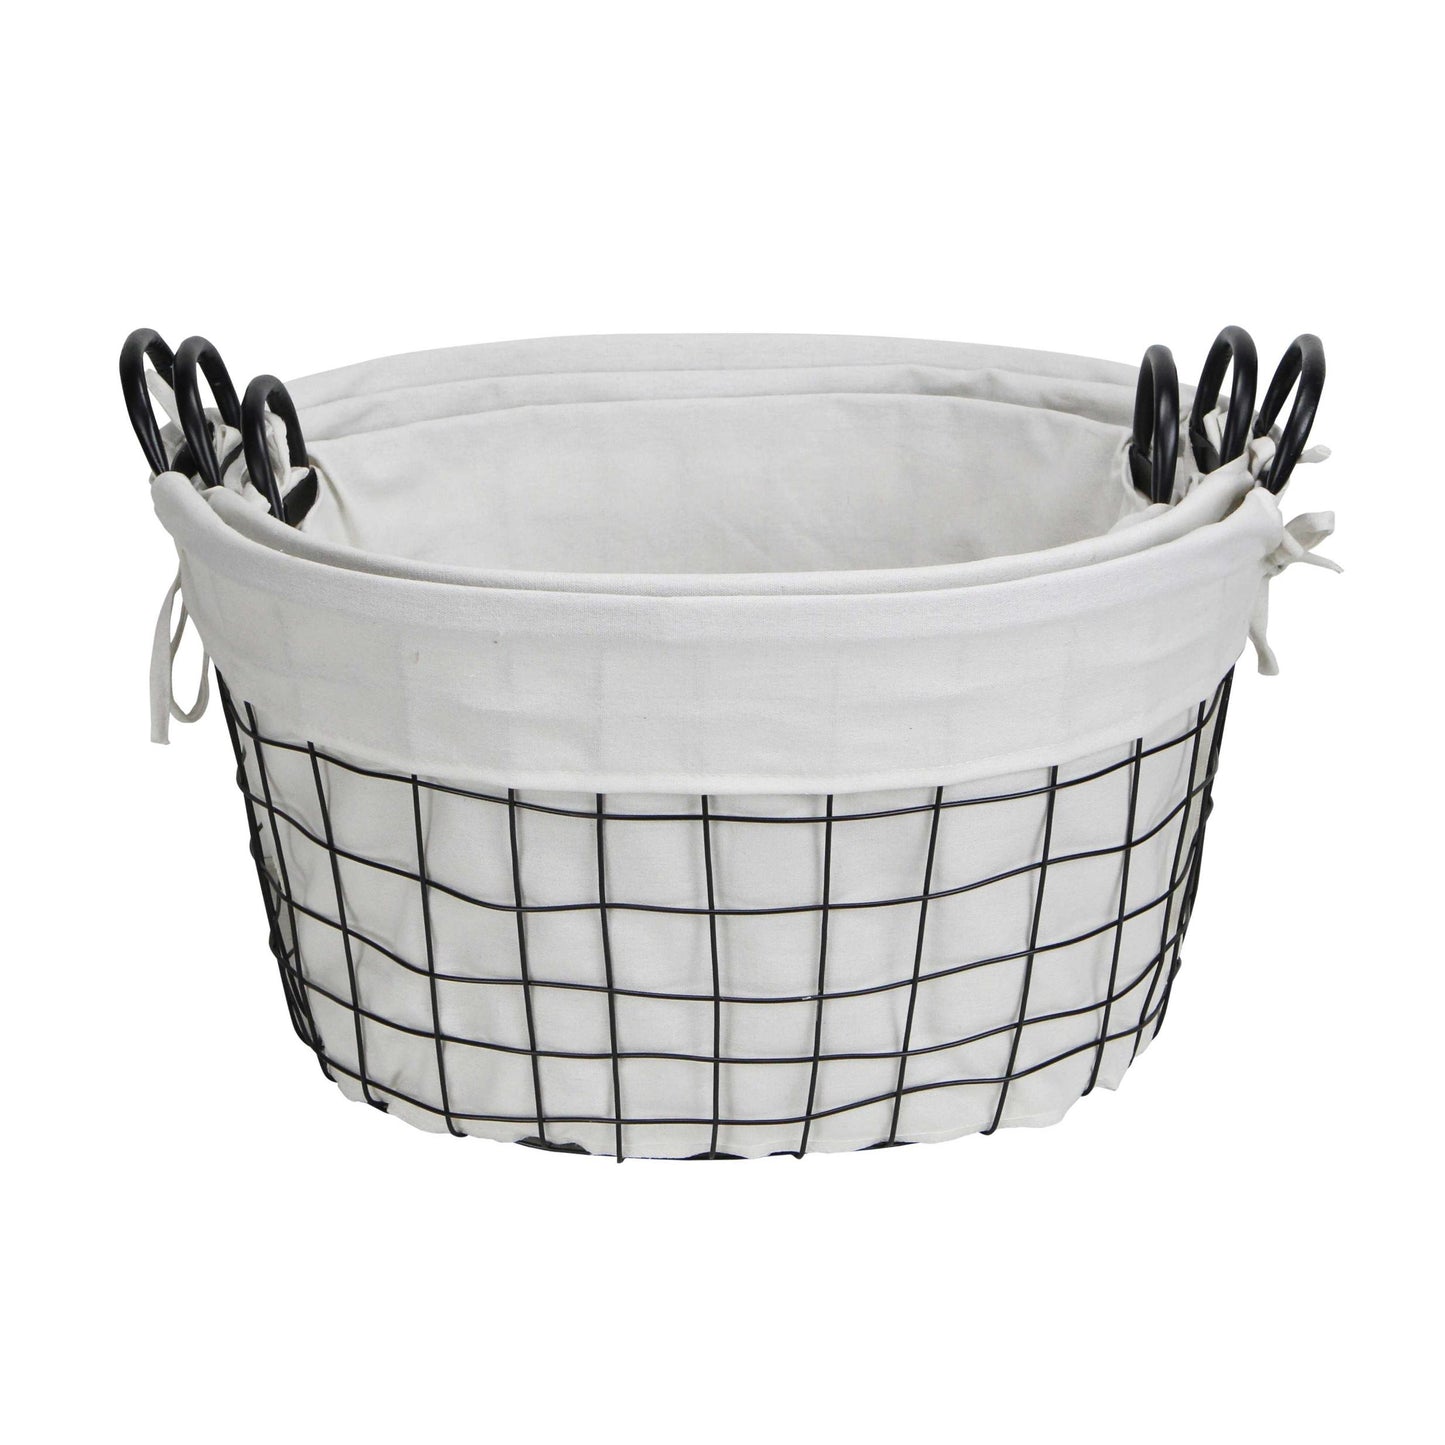 Set of 3 Oval White Lined and Metal Wire Baskets with Handles